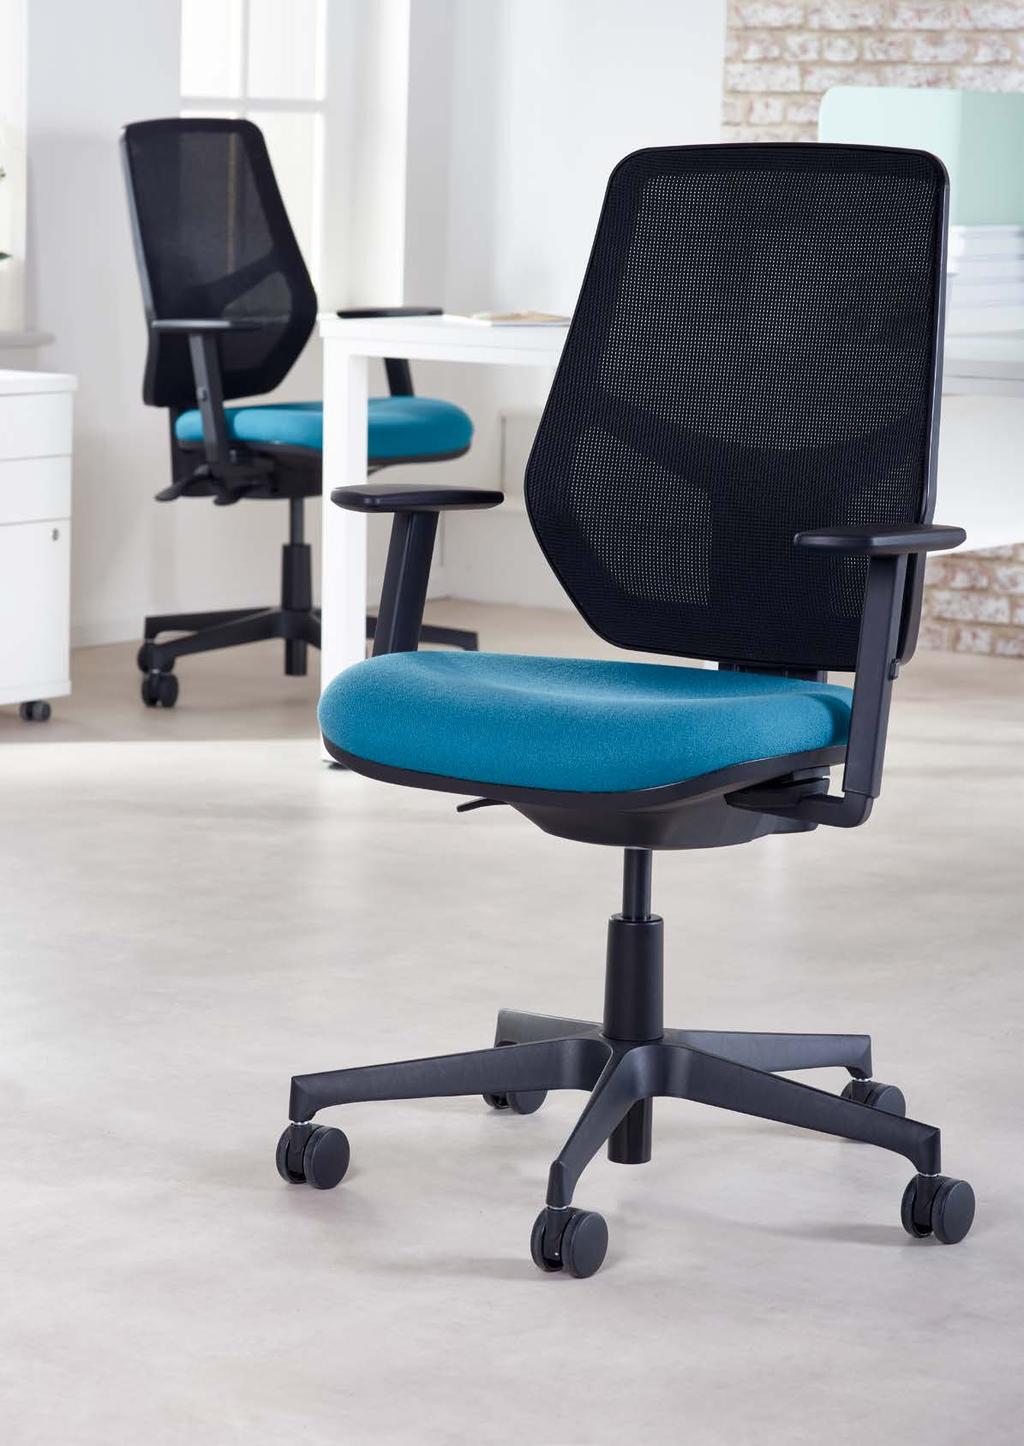 20 21 Remi Mesh the lighter approach Remi Mesh the essential task chair